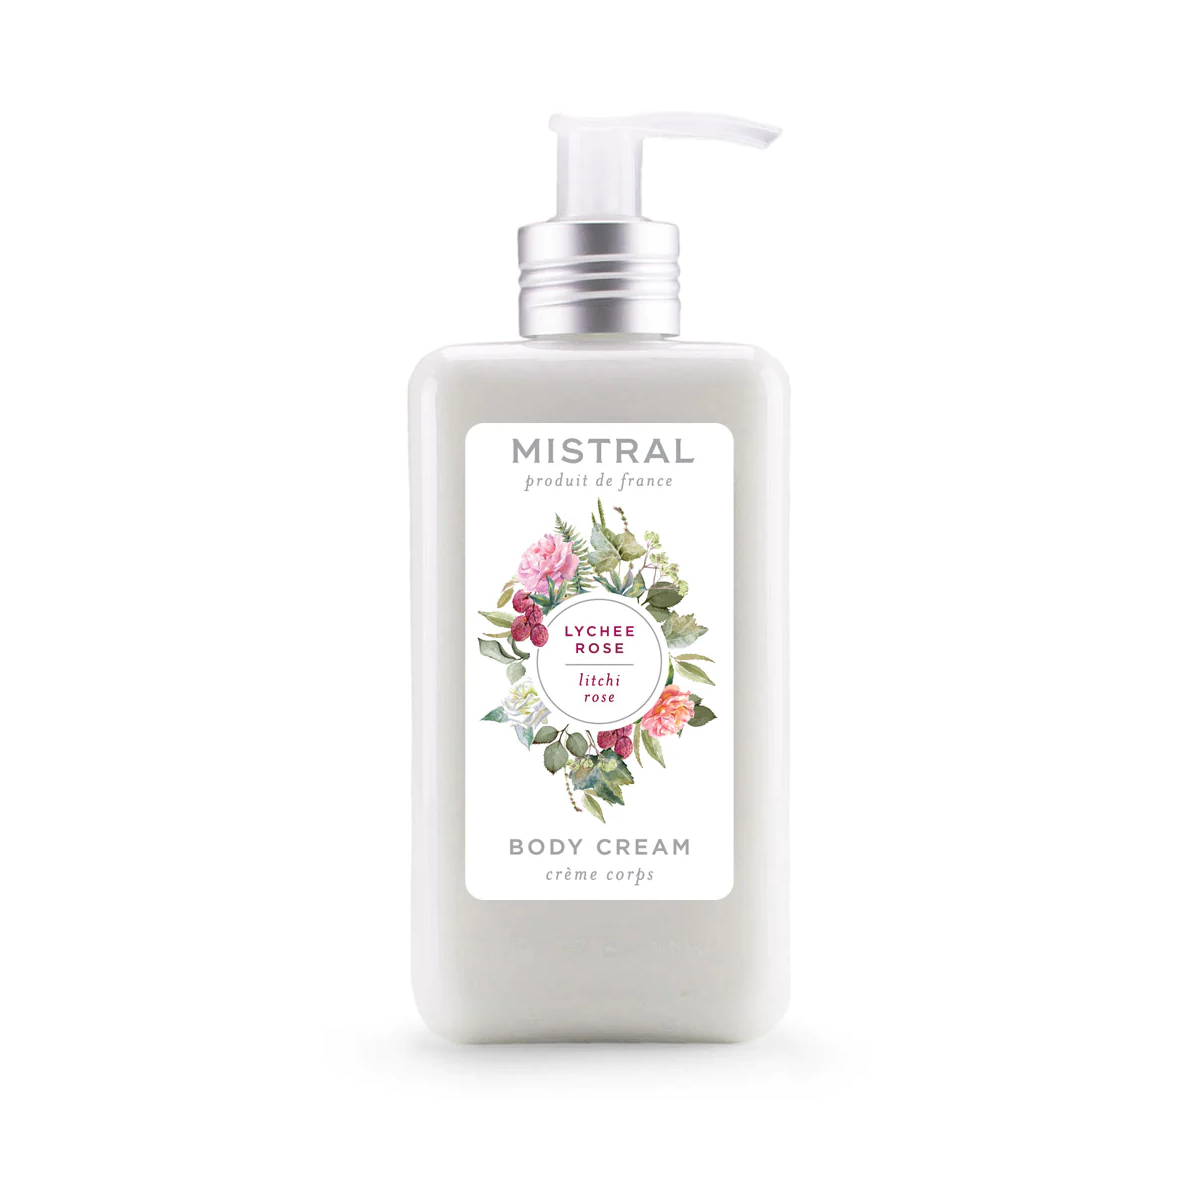 LYCHEE ROSE CLASSIC BODY CREAM by MISTRAL